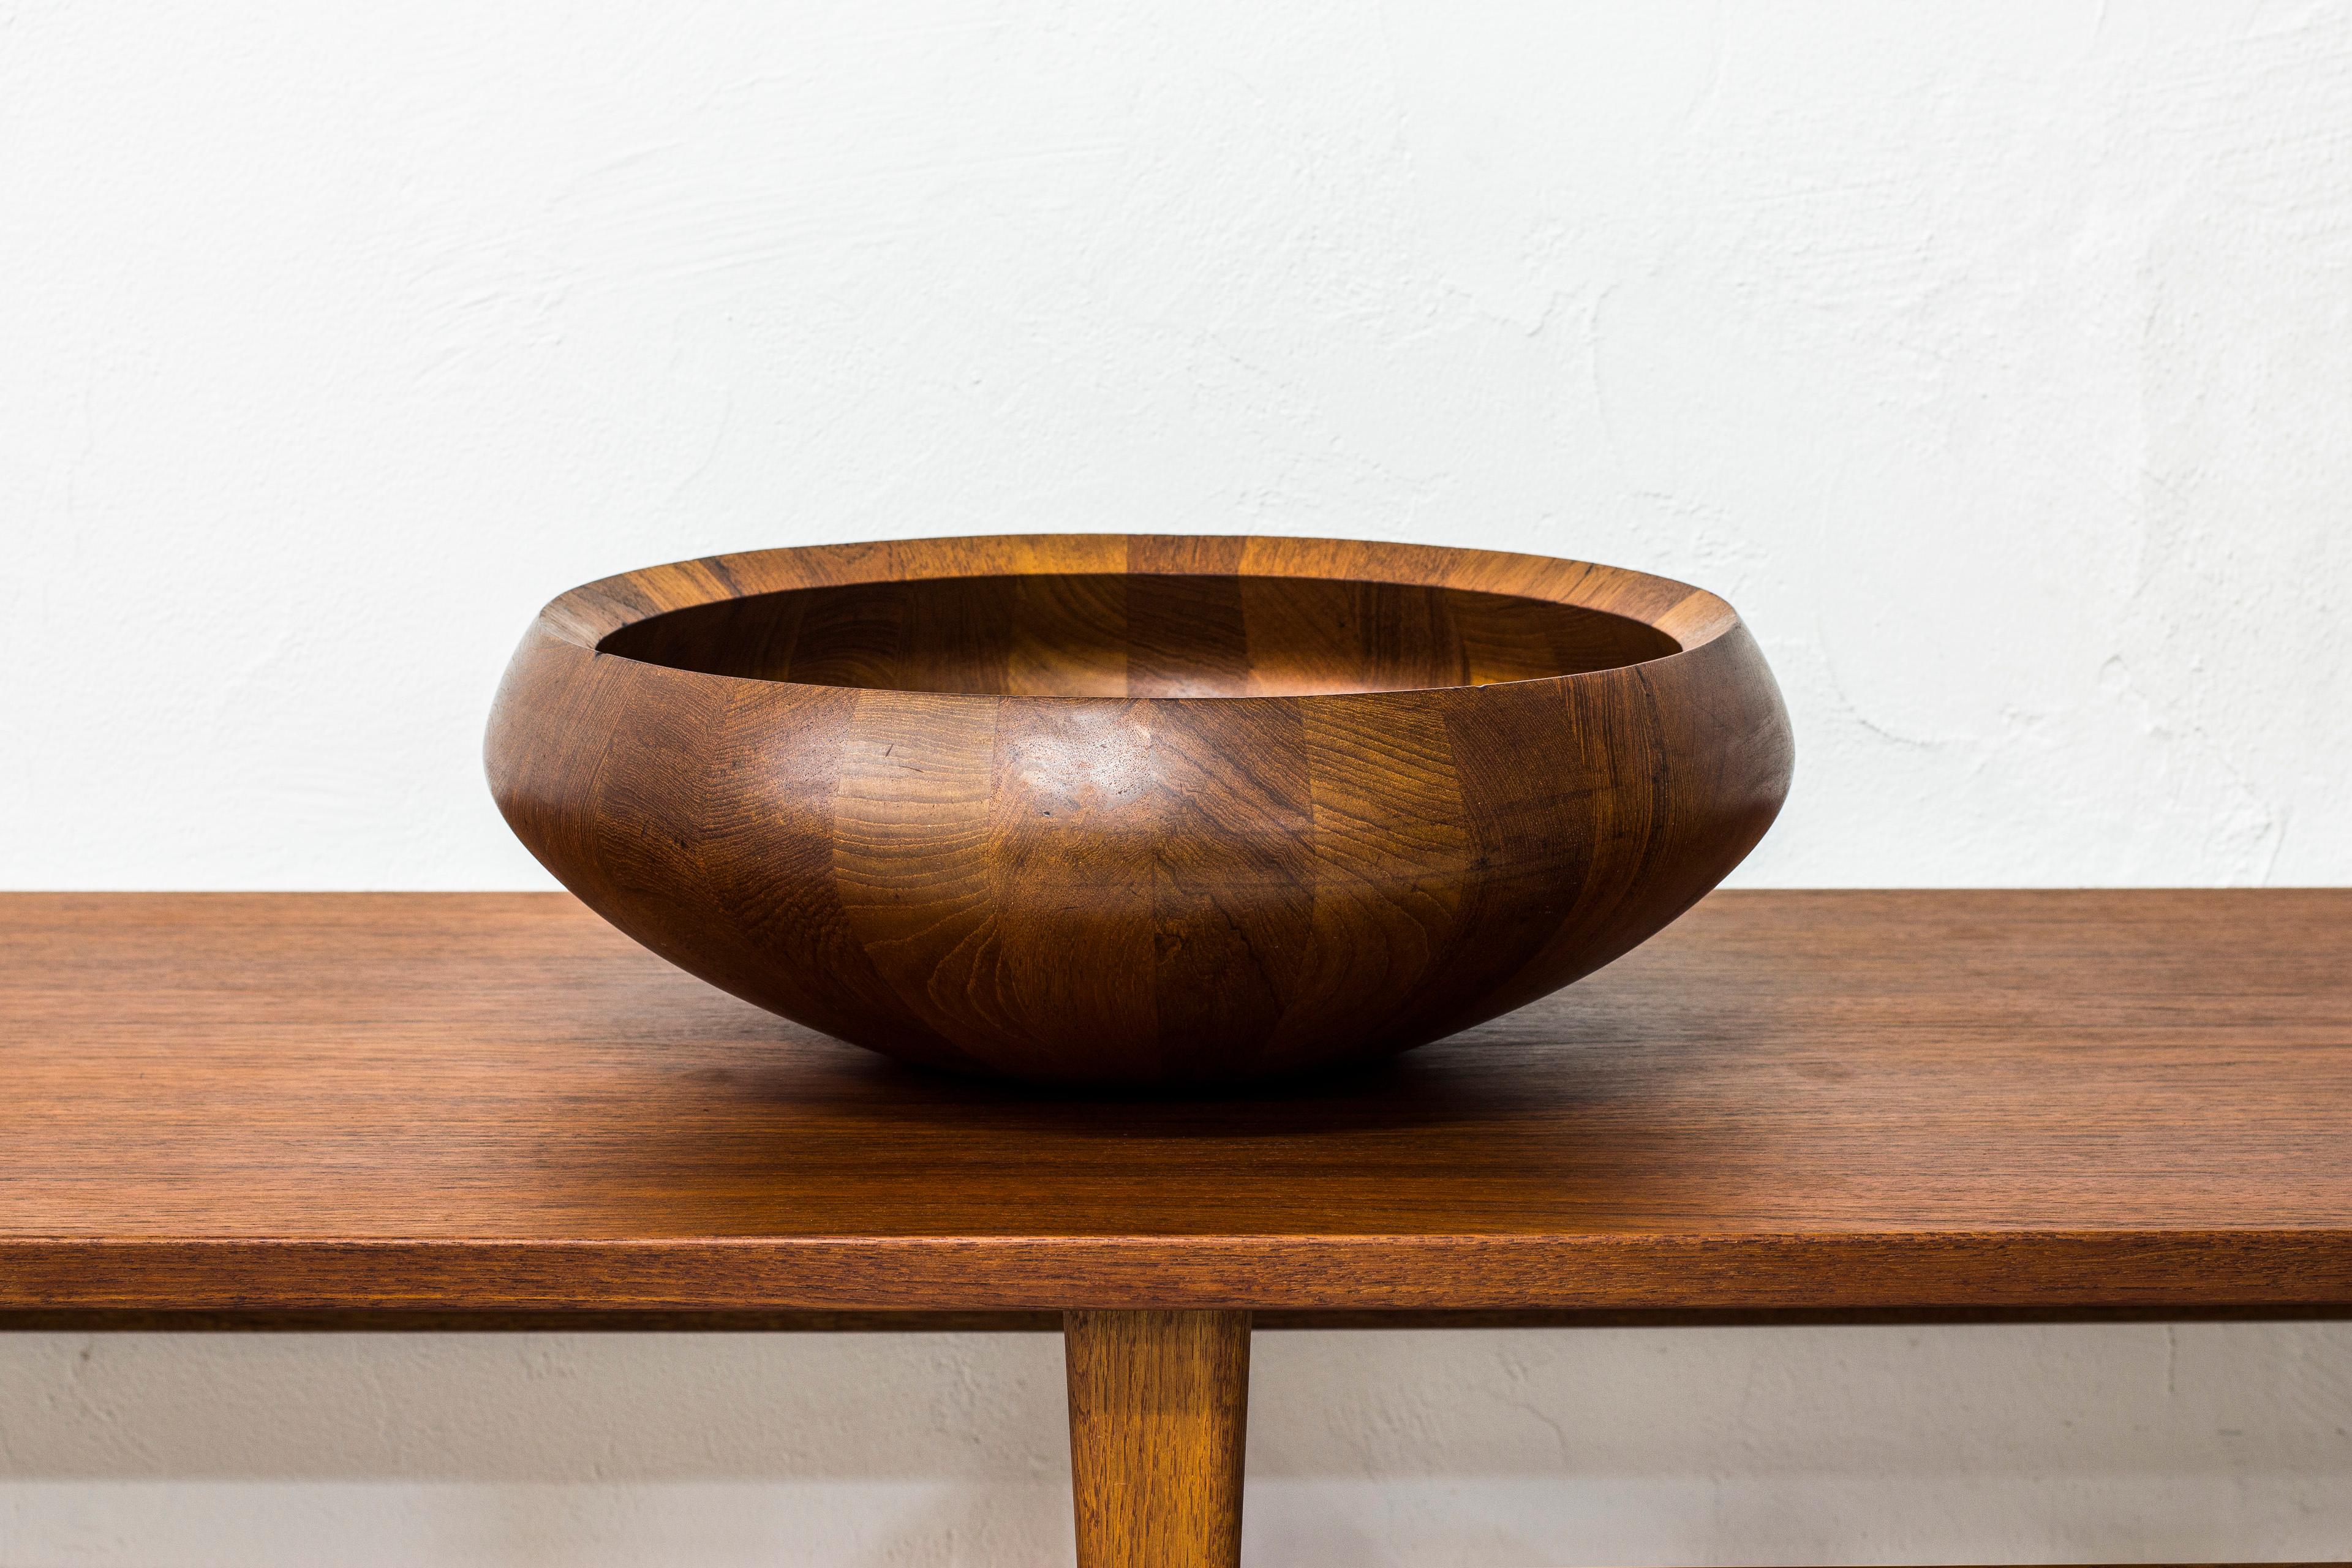 Large bowl designed by Jens Harald Quistgaard. Produced in Denmark by Dansk during the 1950s. Made from solid staved teak. Good vintage condition with signs of usage and patina.